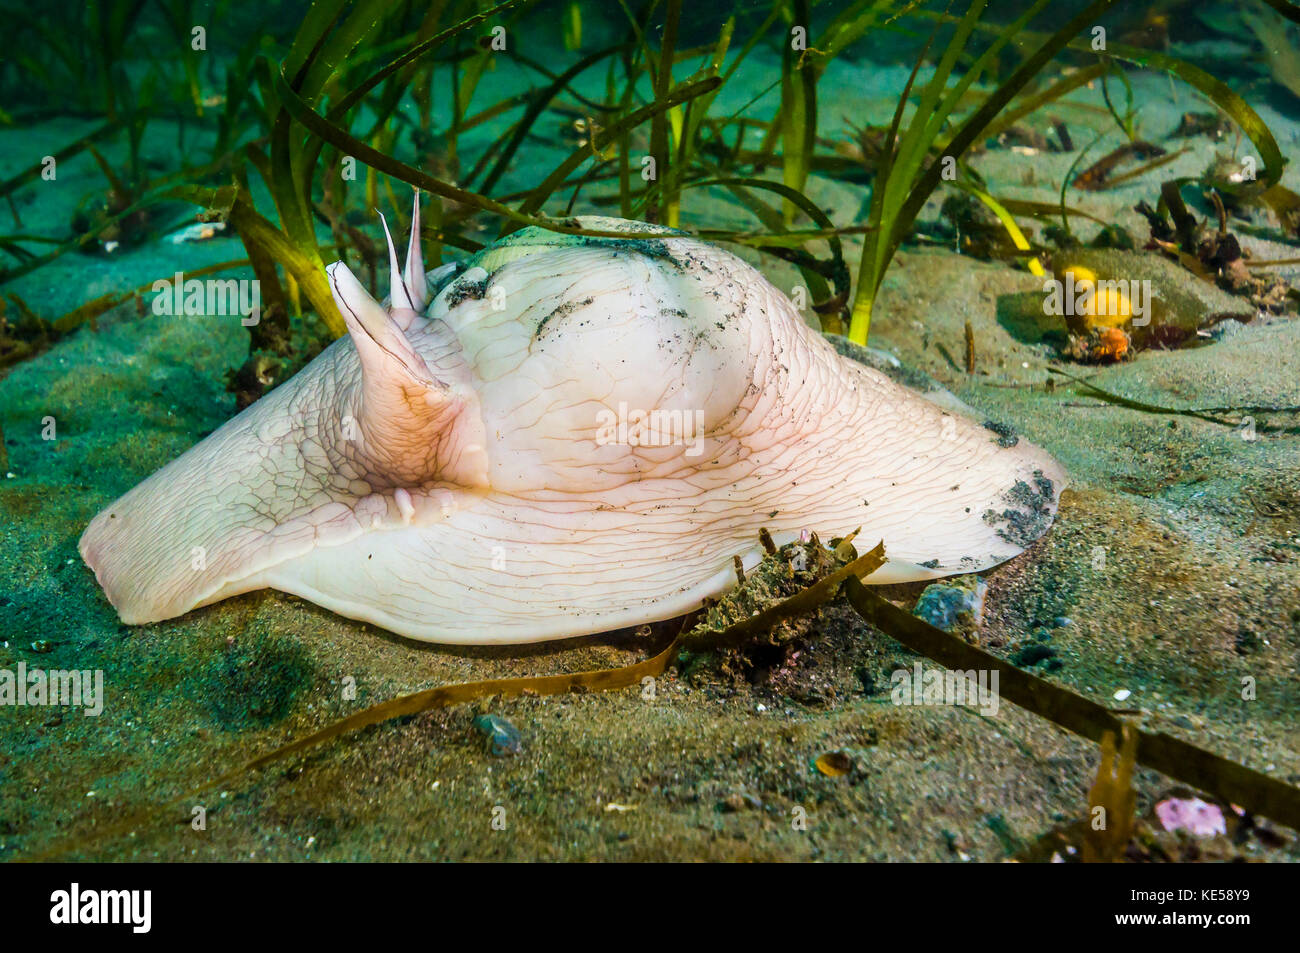 Lewisâ€™s moon snail carrying a shell underneath as it moves across the seafloor. Stock Photo